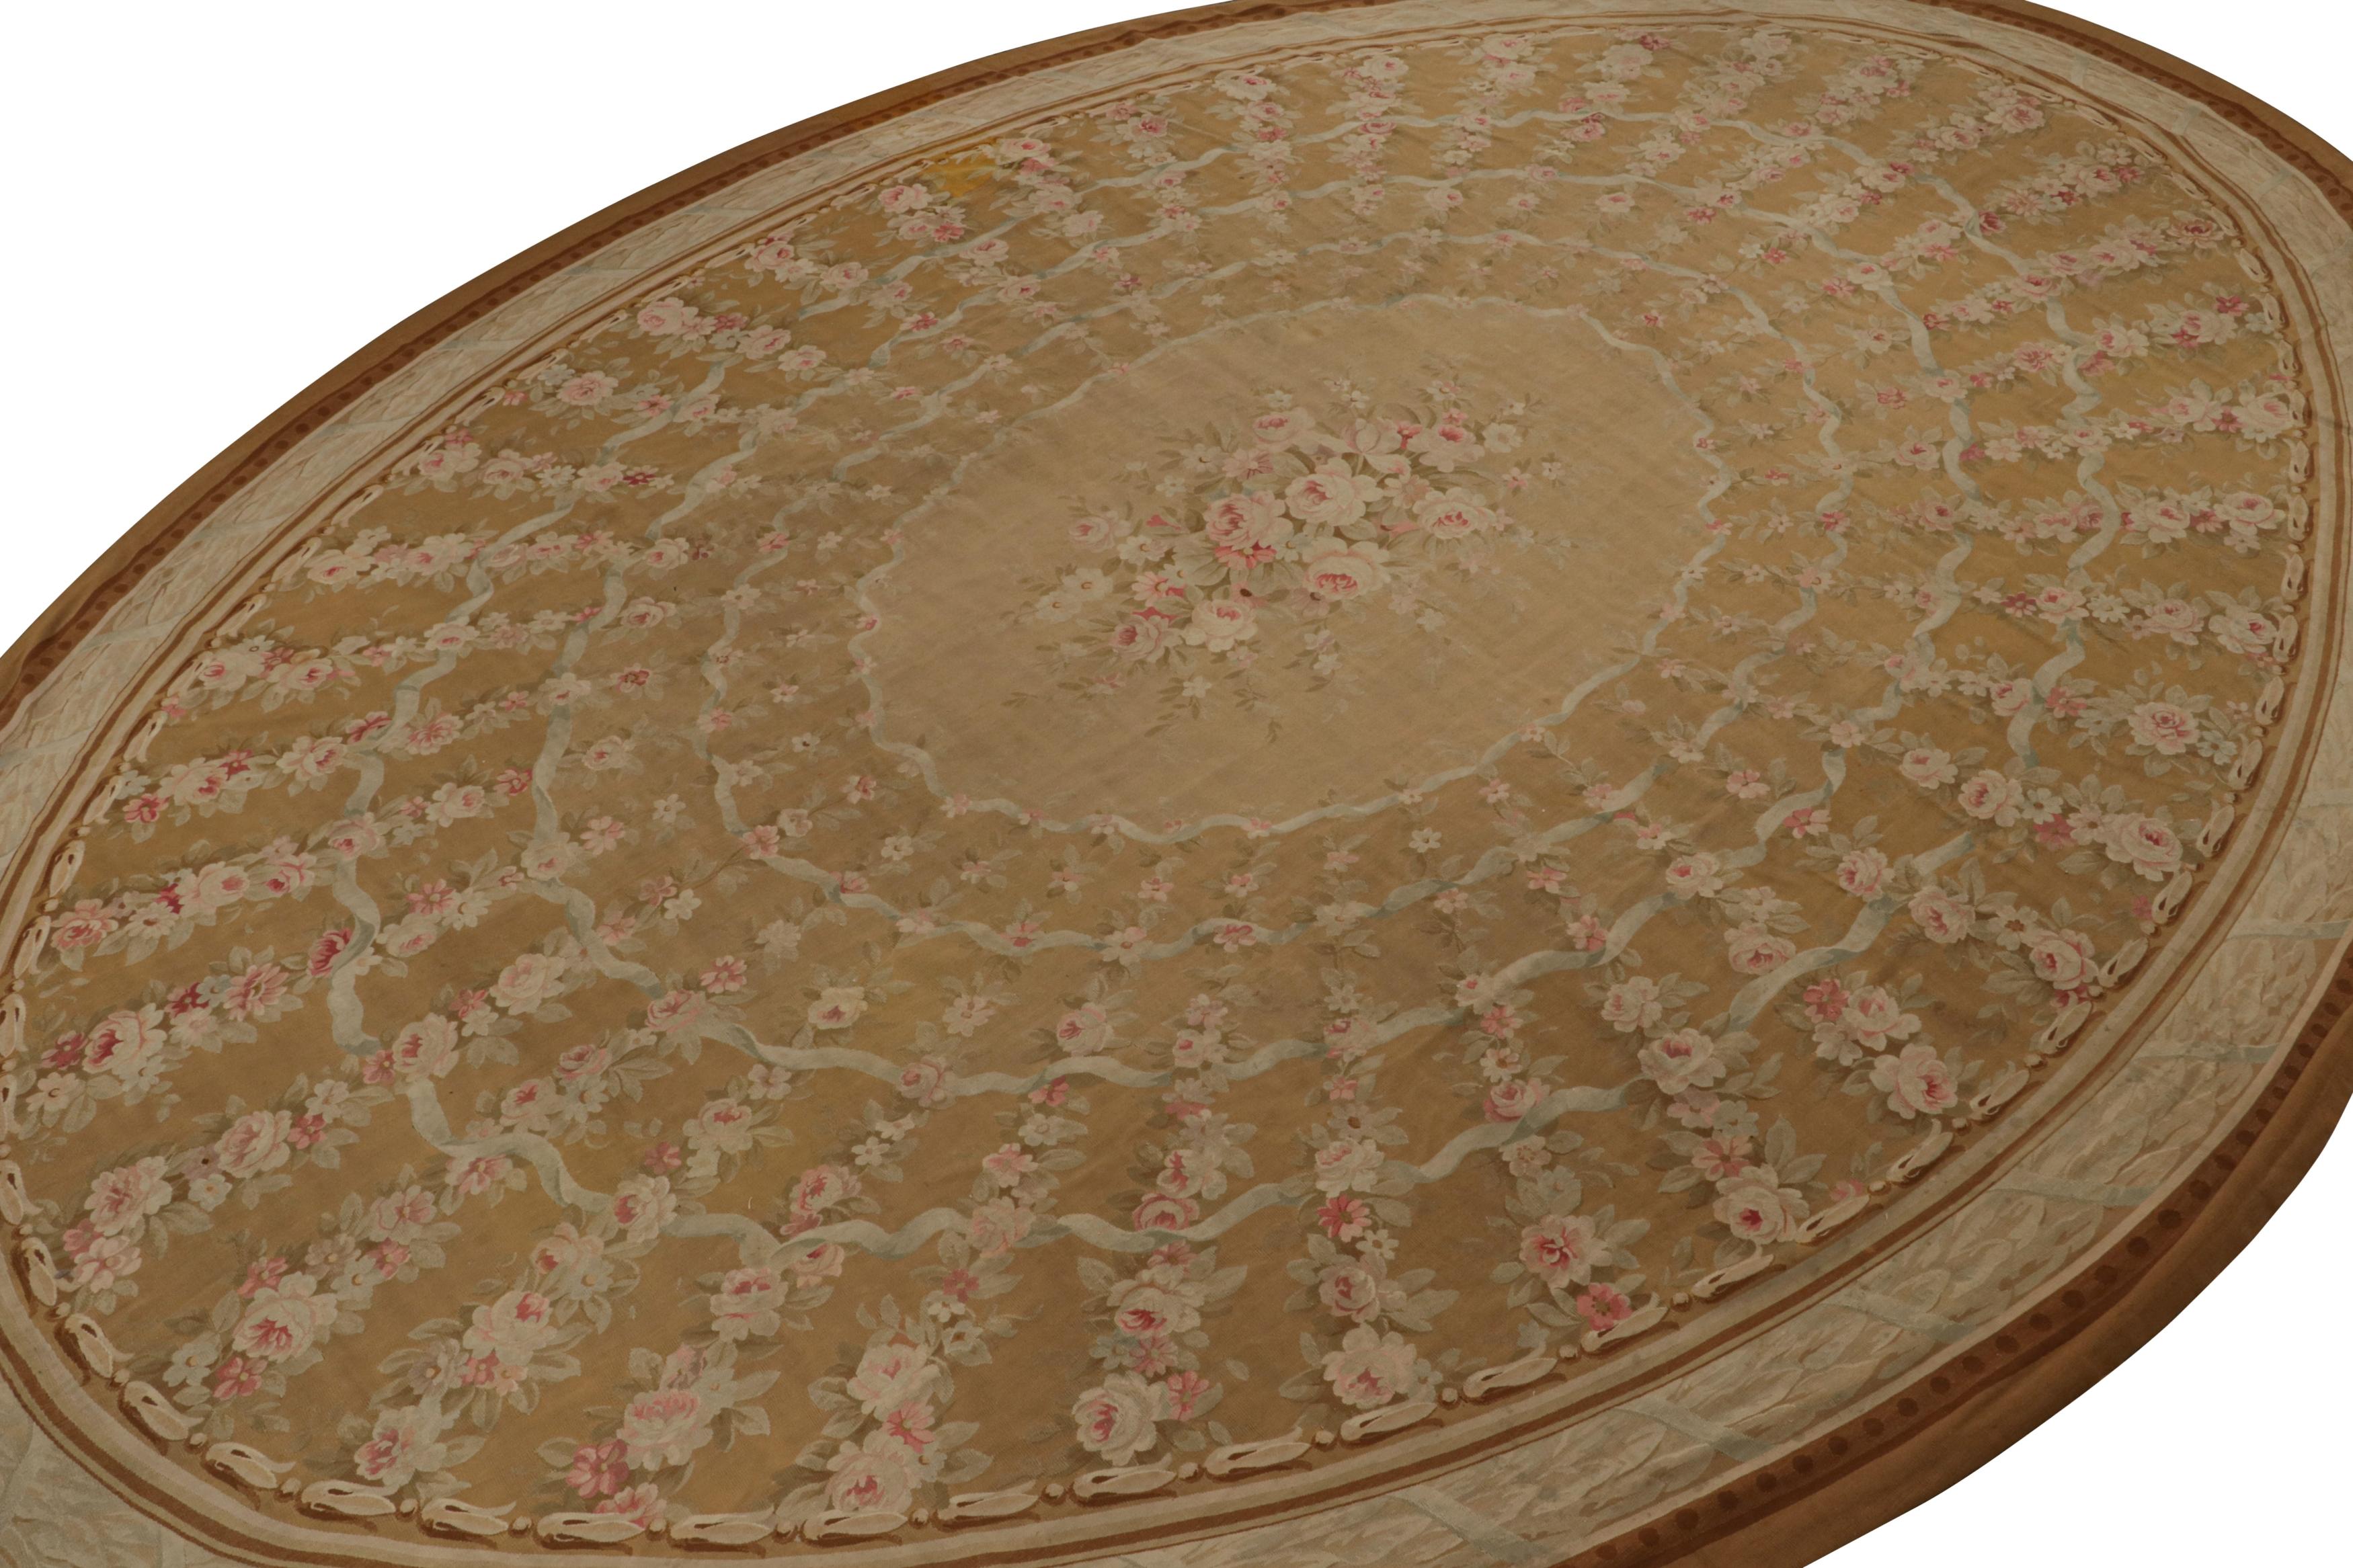 Handwoven in wool, circa 1890-1900, this 13x18 antique Aubusson flatweave and oversized rug is a rare oval-shaped curation from  its period. 

On the design: 

Originating from France during the late 19th century, this oval rug features a rich brown